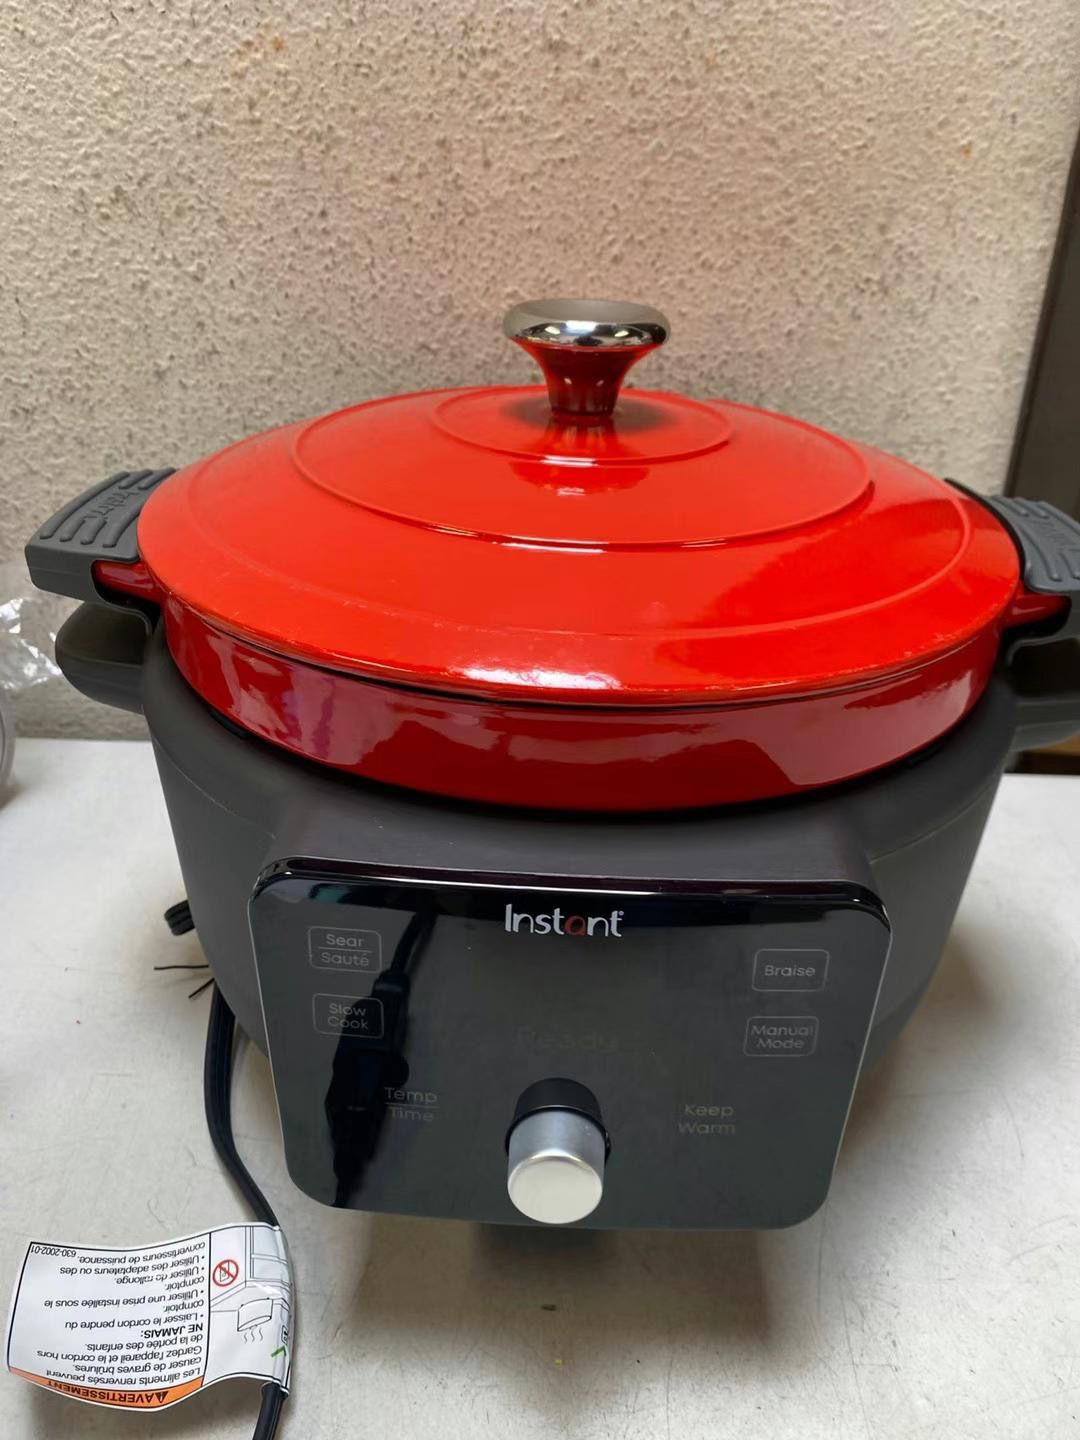 Instant Pot - Precision 5-in-1 Electric Dutch Oven - Cast Iron - Red